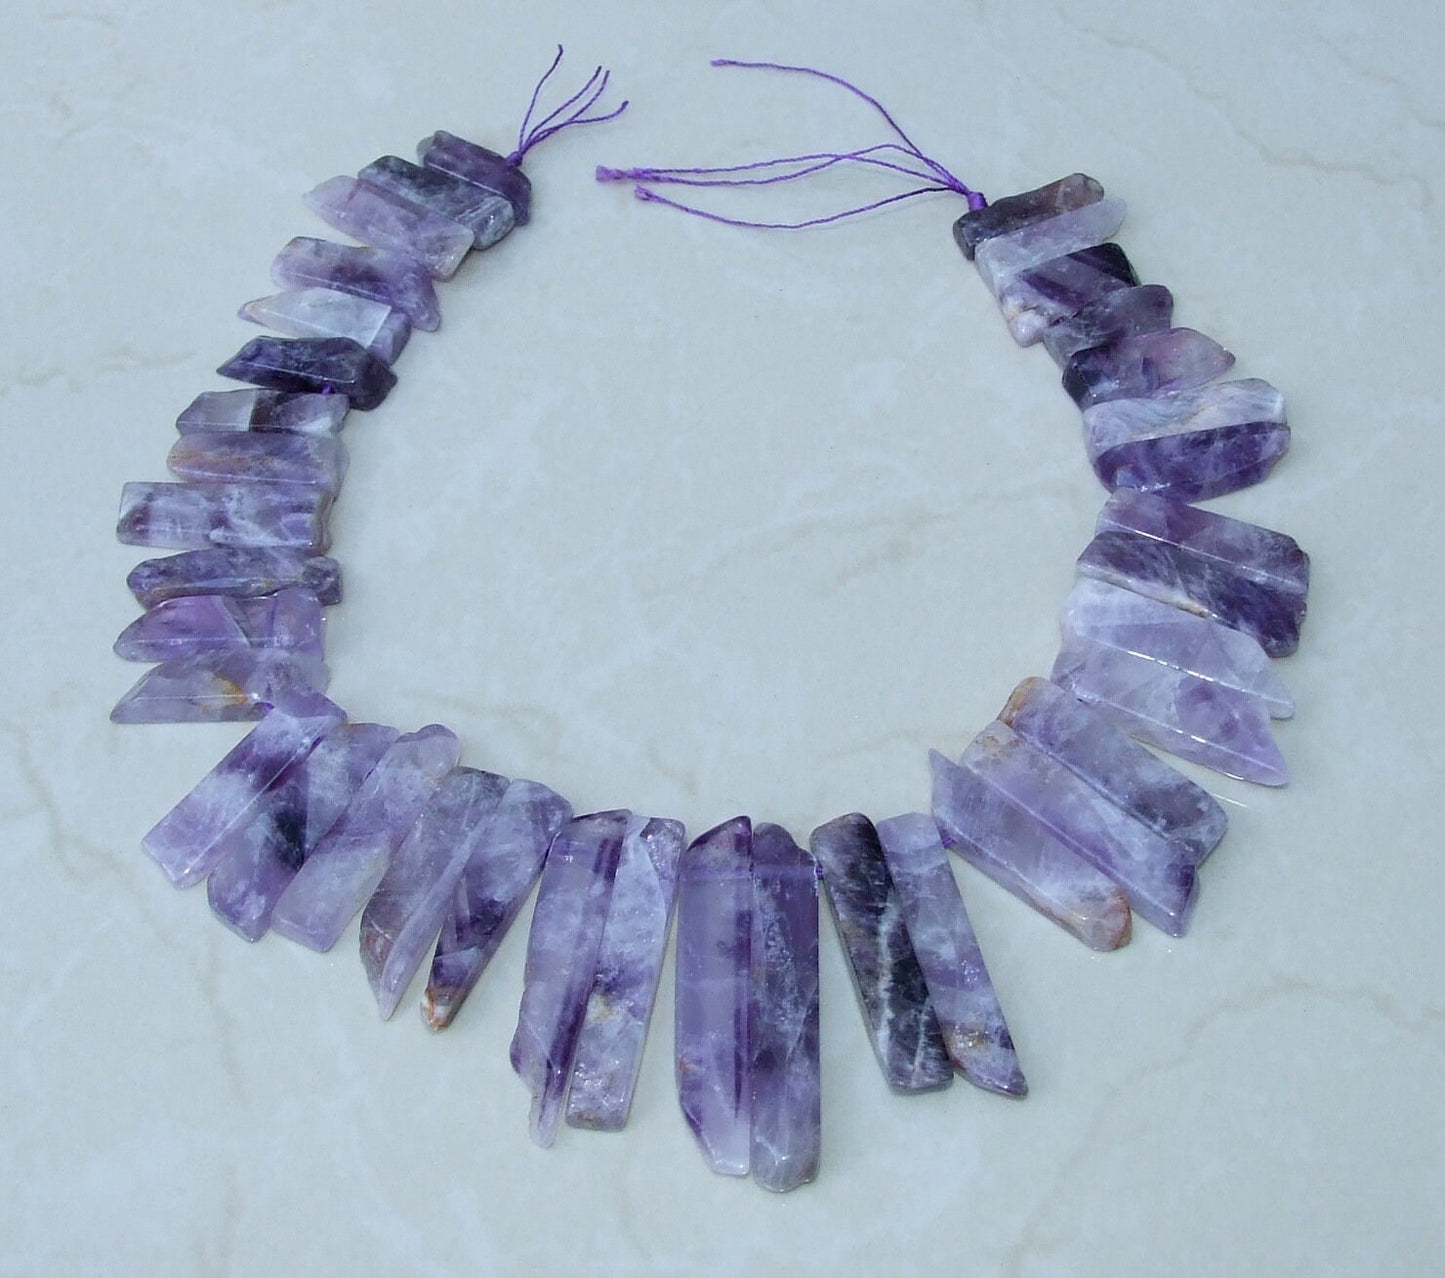 Amethyst Beads, Polished Natural Amethyst Slice, Amethyst Pendants, Gemstone Beads, Amethyst Points Jewelry, Half Strand - 25mm to 50mm - A4